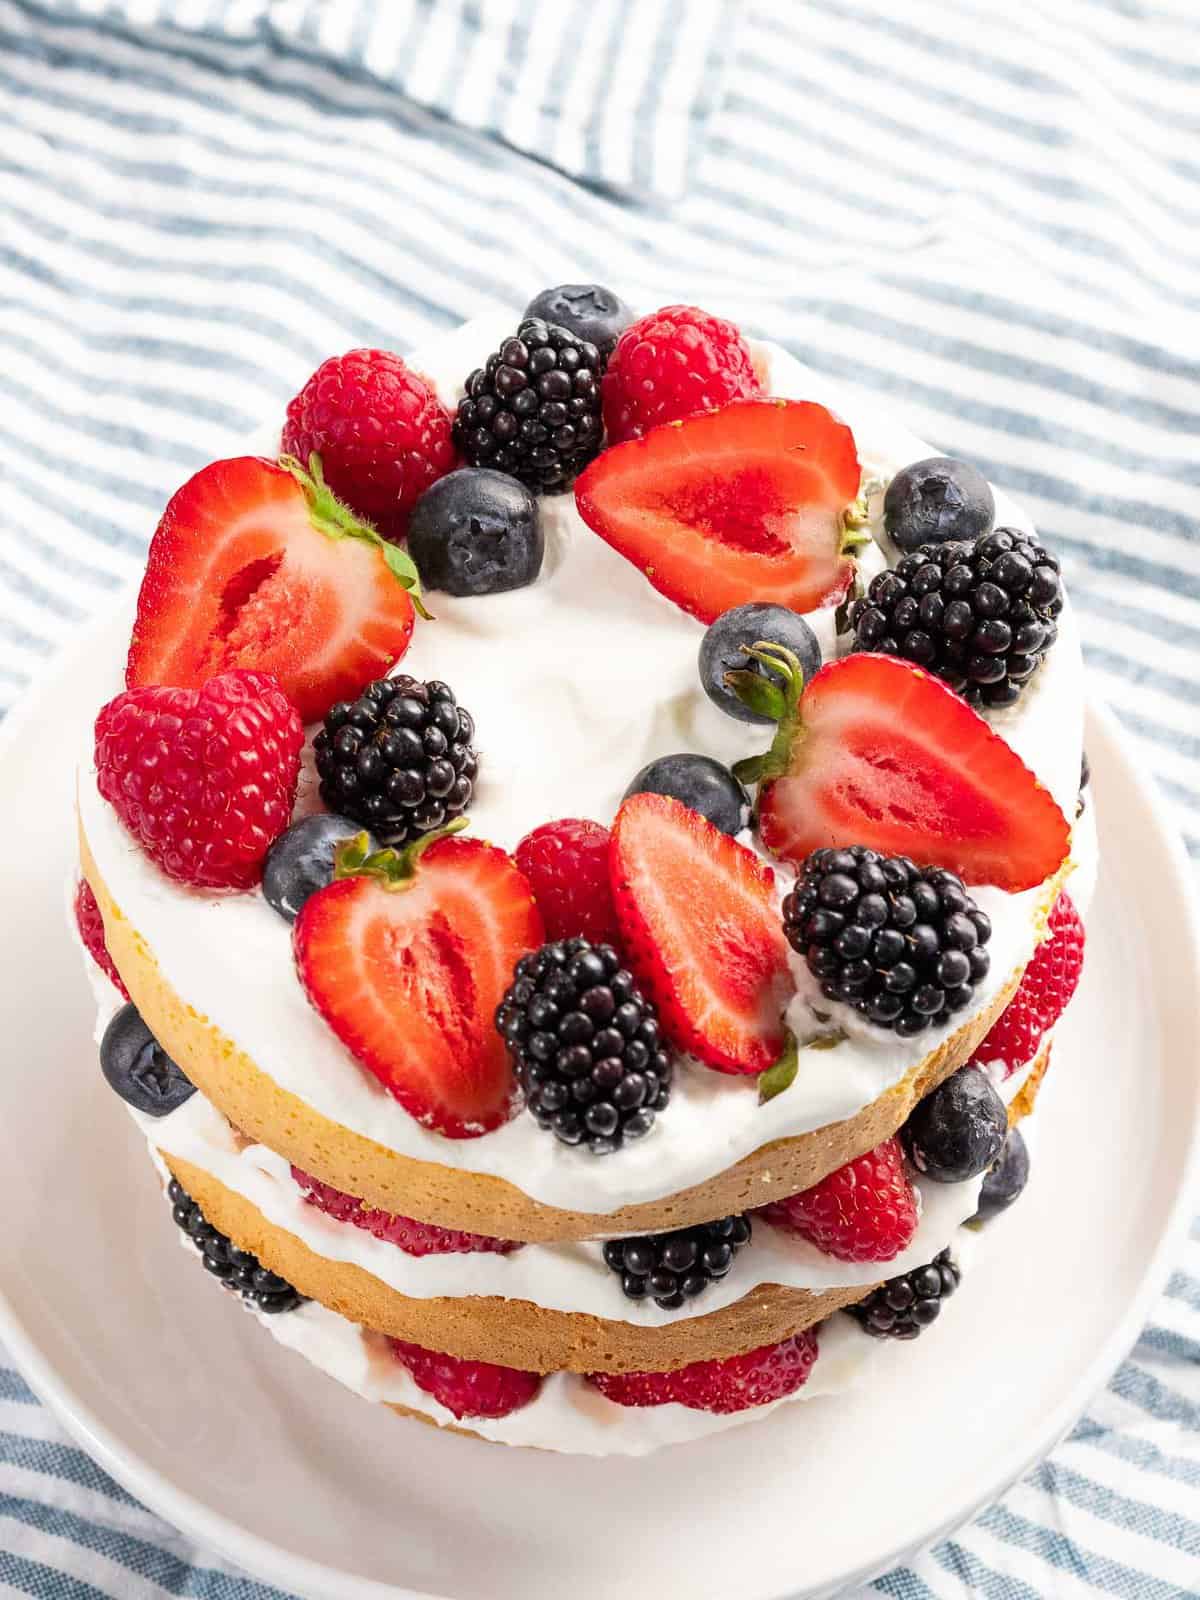 Berry cake with strawberries, blueberries, raspberries, and blackberries layered with cream and sponge cake.